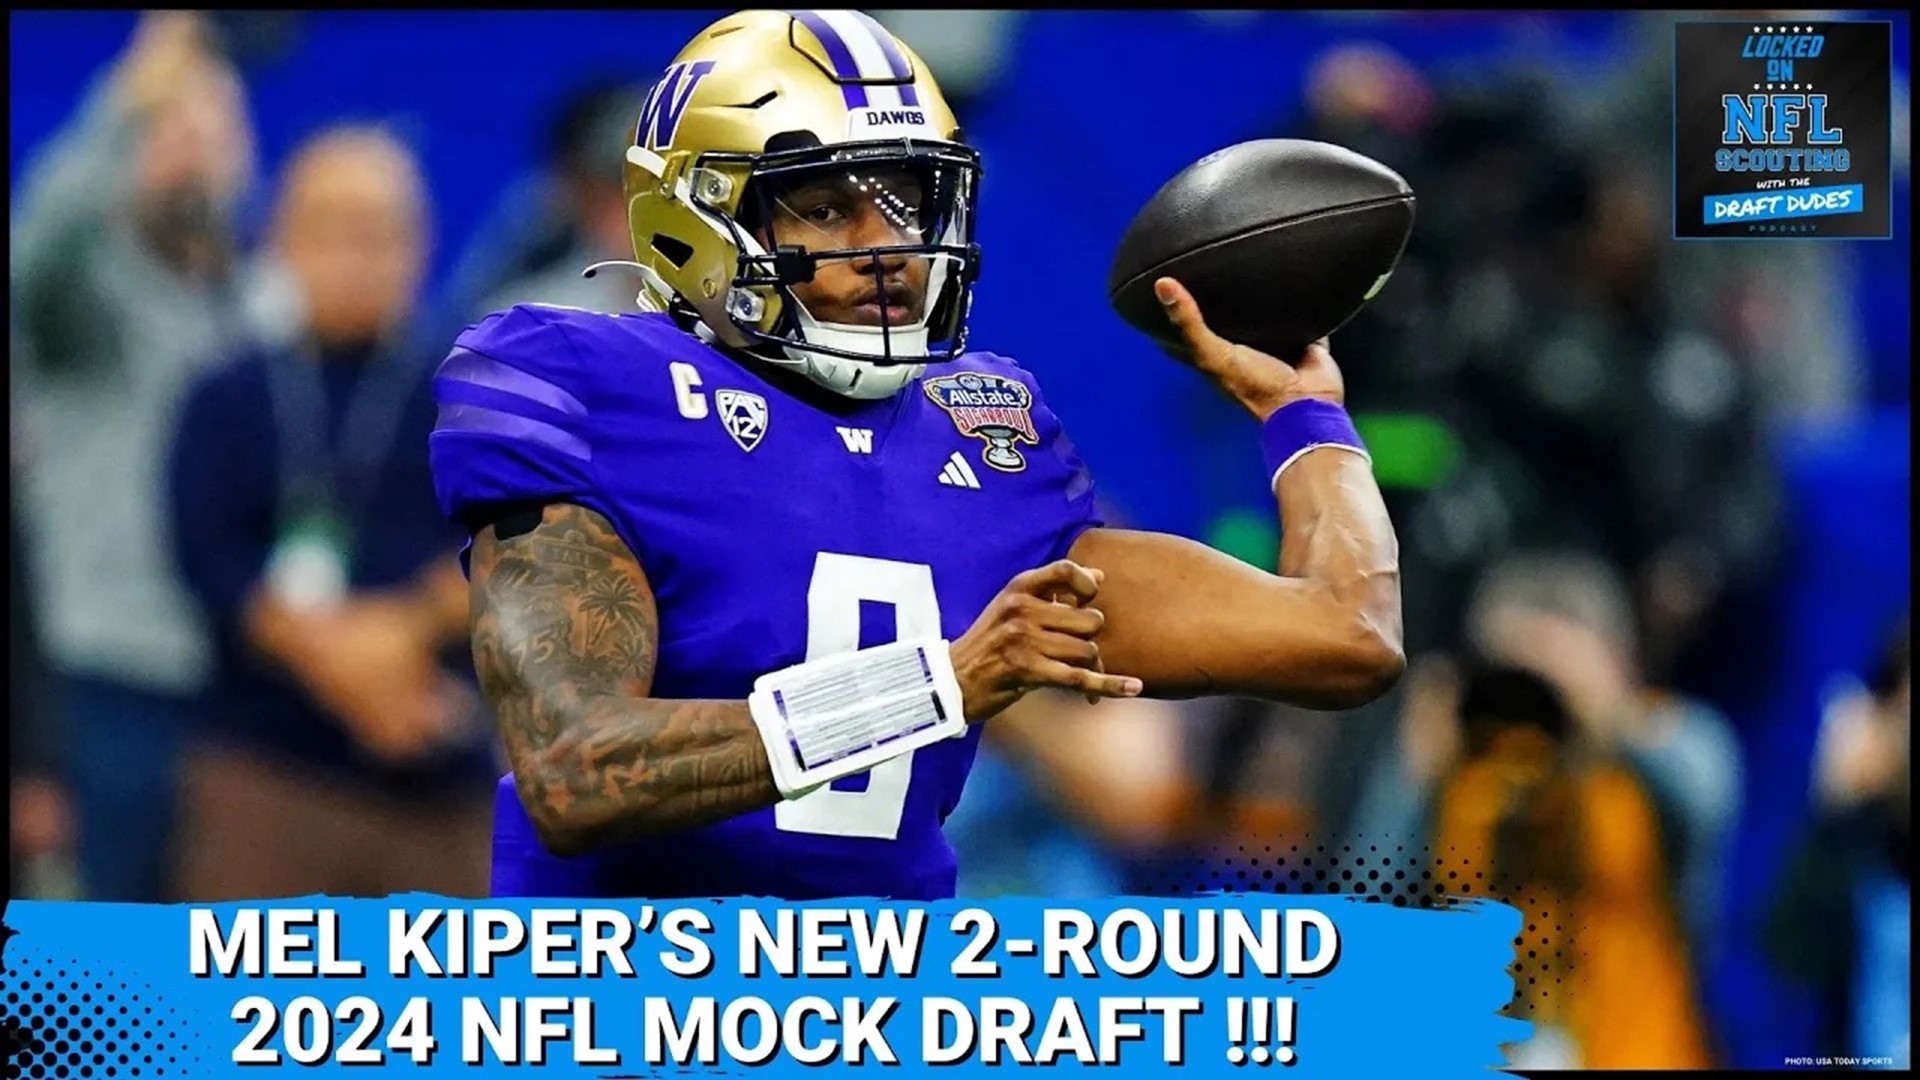 Mel Kiper dropped his latest 2024 NFL Mock Draft which featured three teams moving up to select quarterbacks.